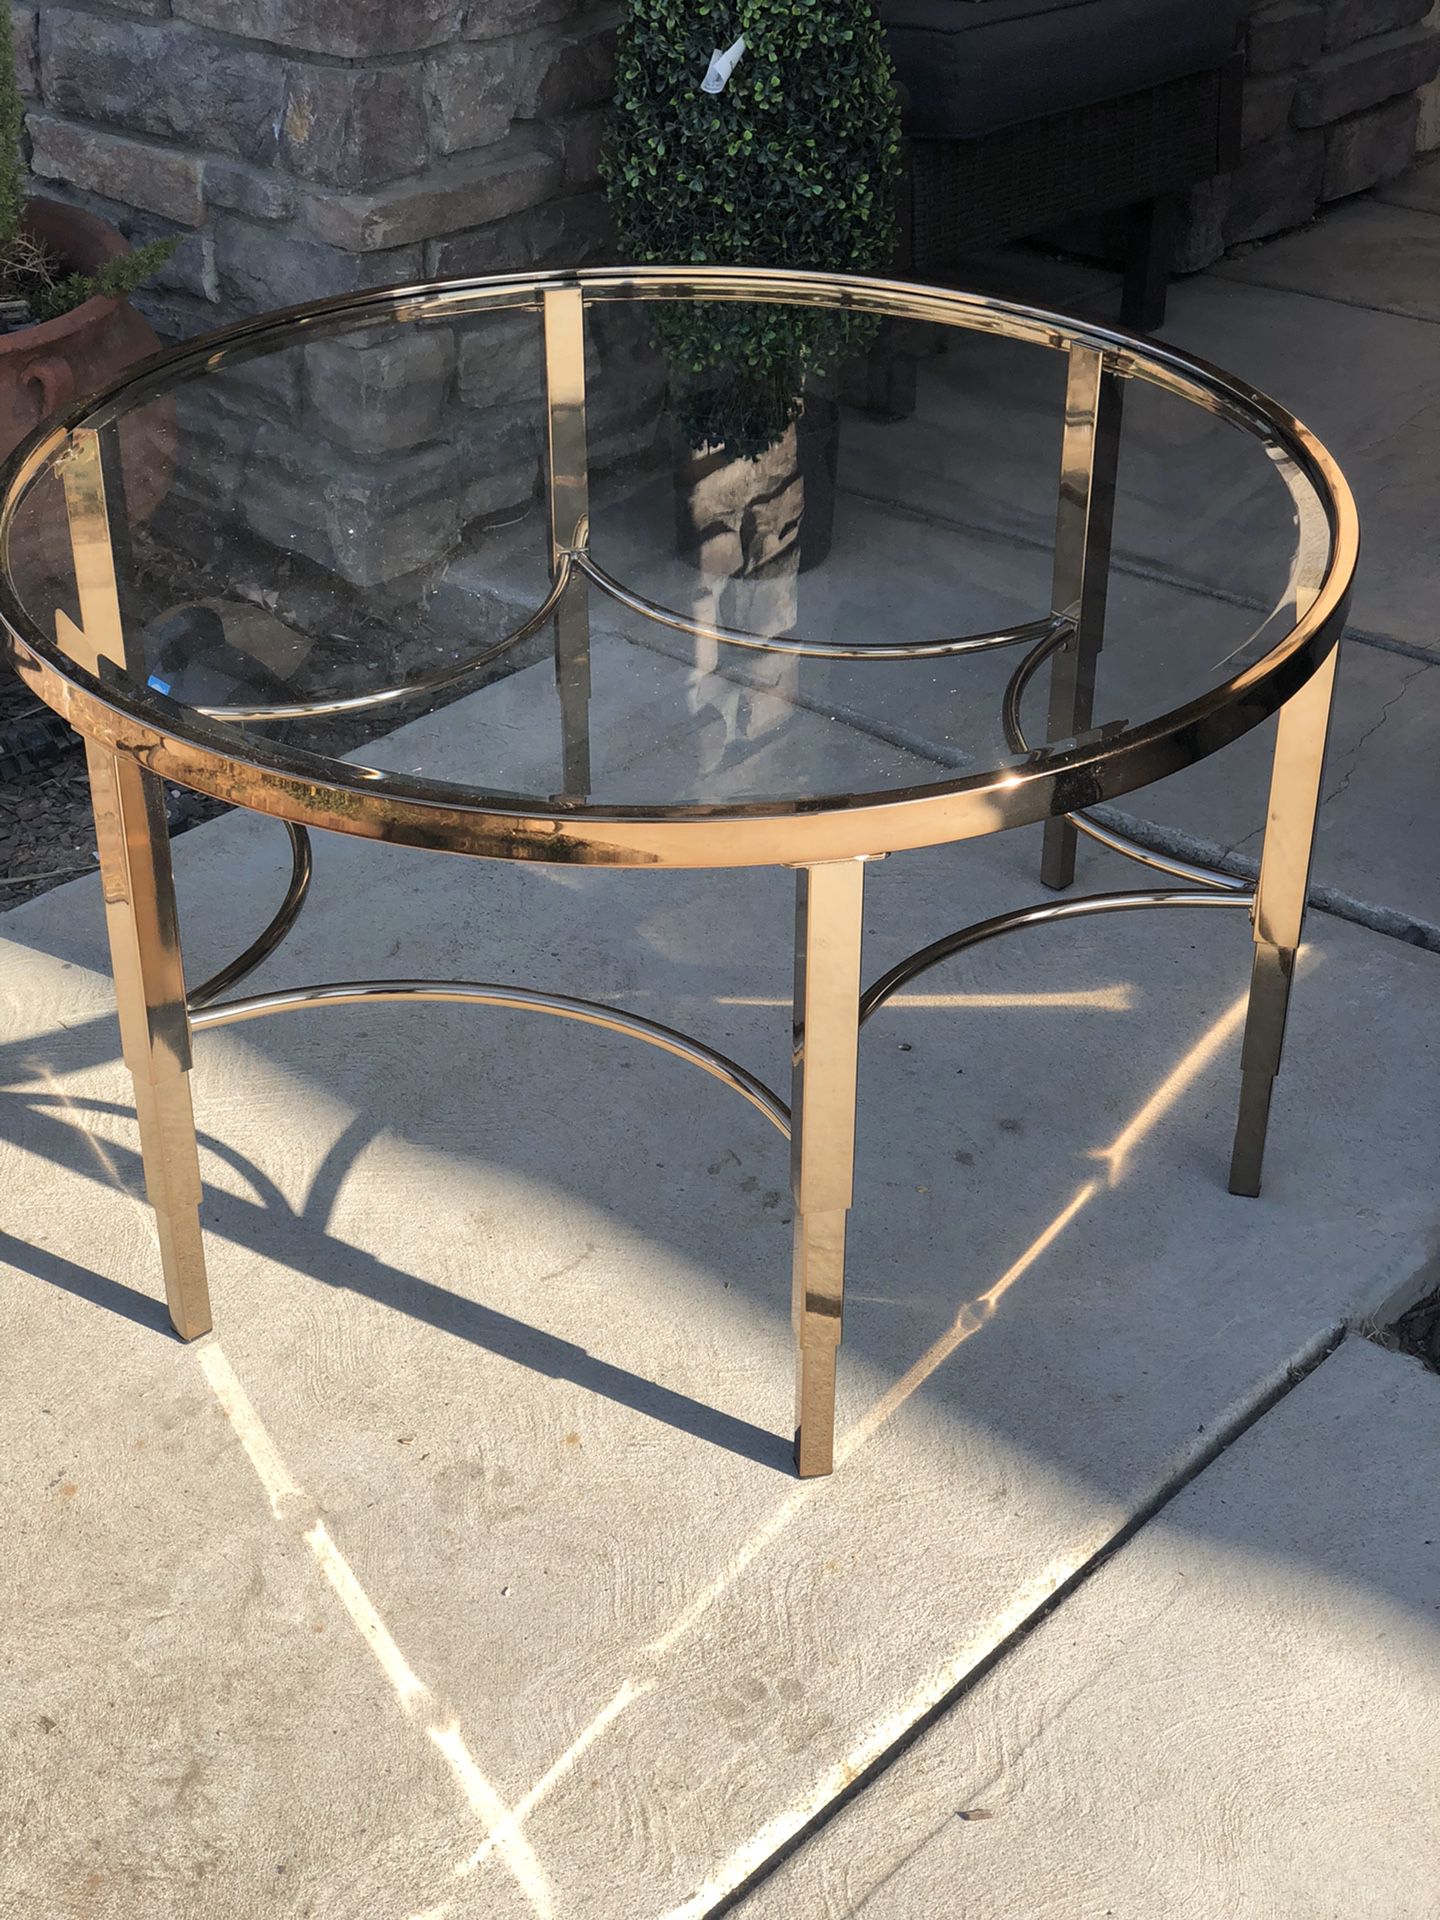 Brand new gold color metal coffee table. Retails for over $300